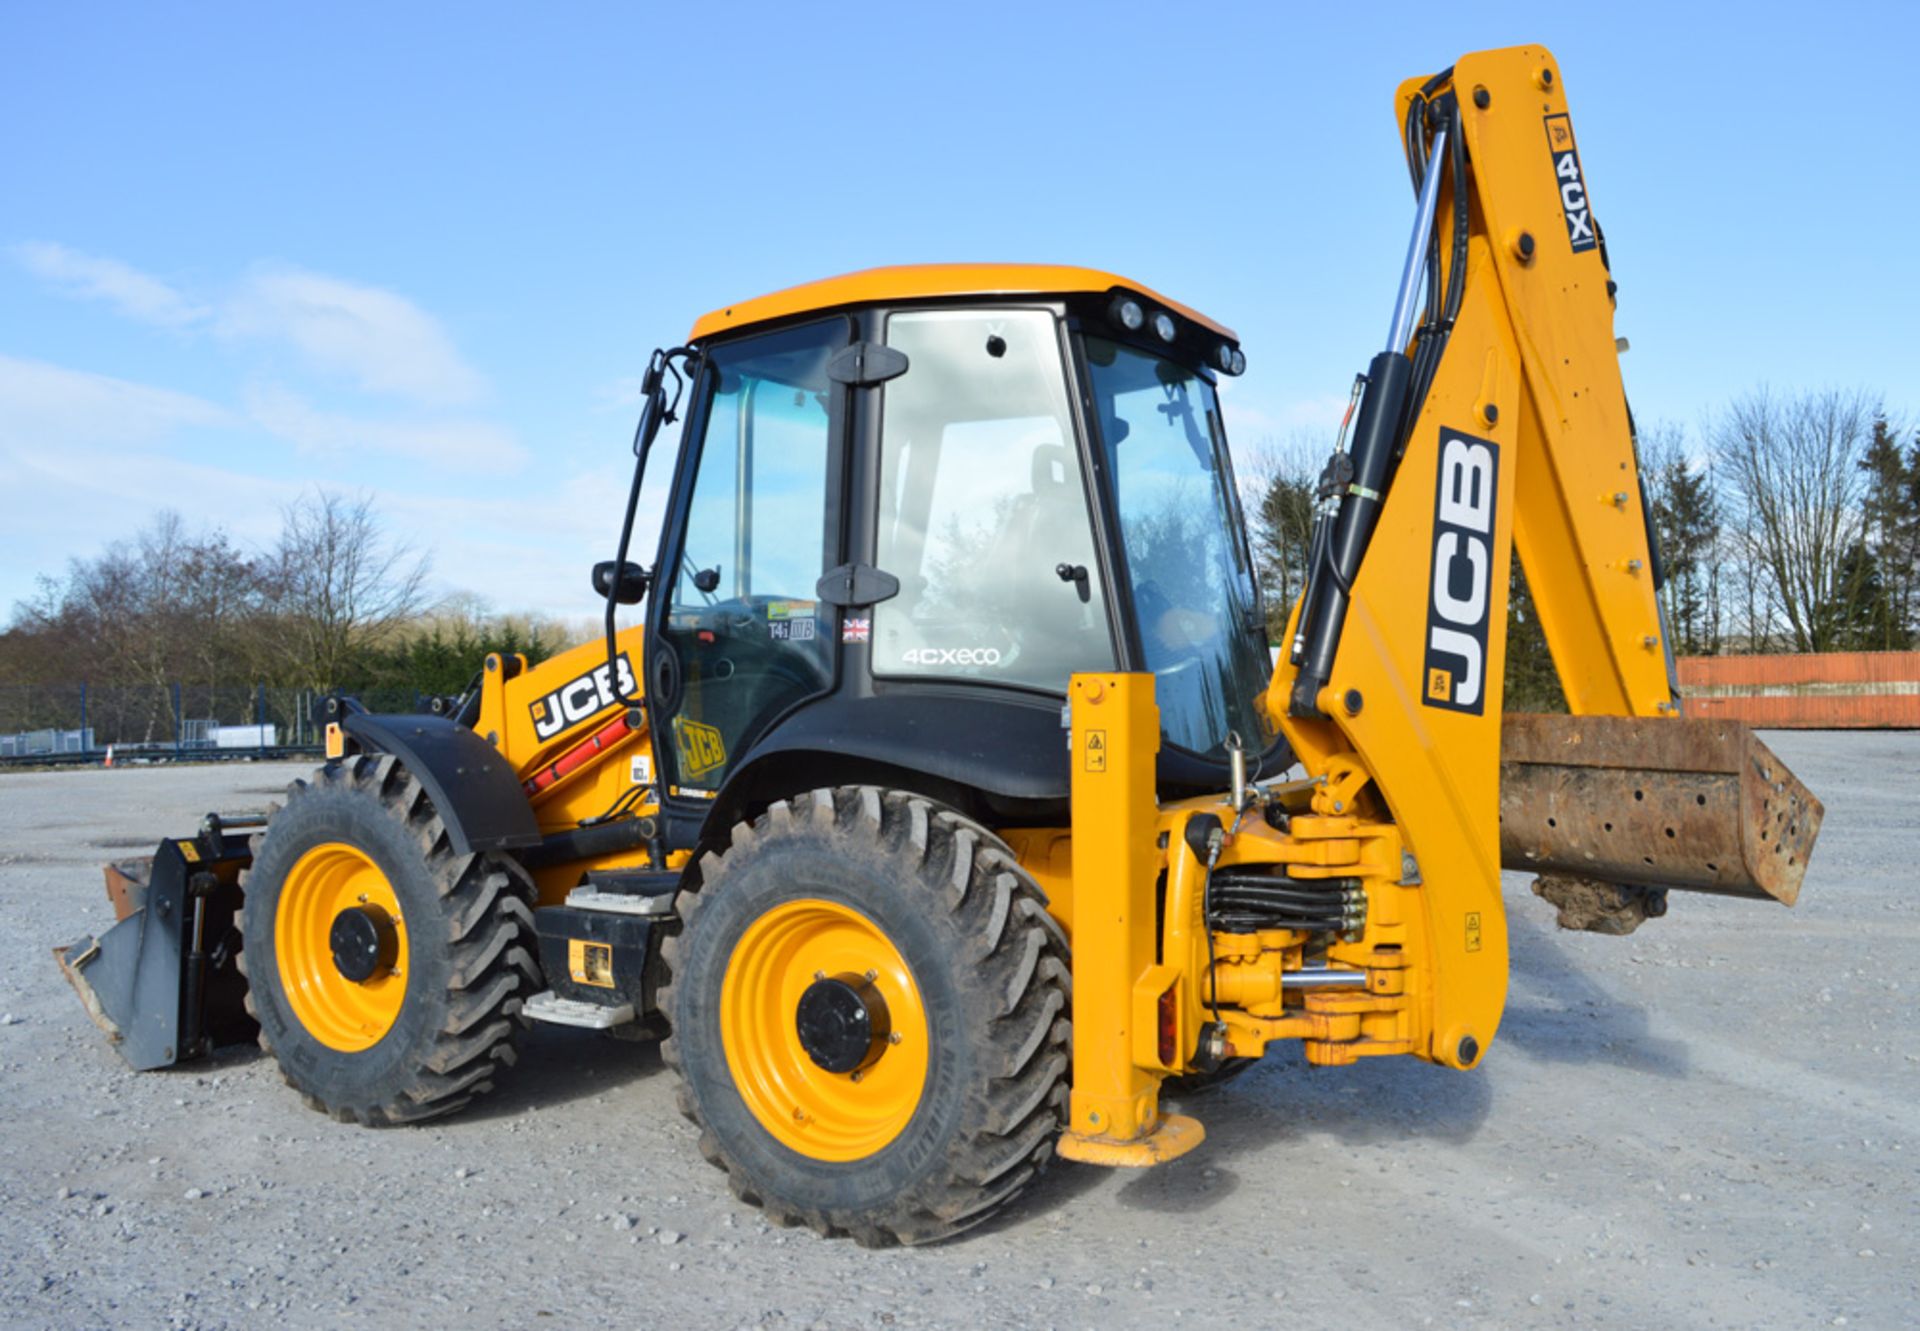 JCB 4CX Contractor backhoe loader Year: 2014 S/N: 2269627 Recorded Hours: 78 - Image 2 of 17